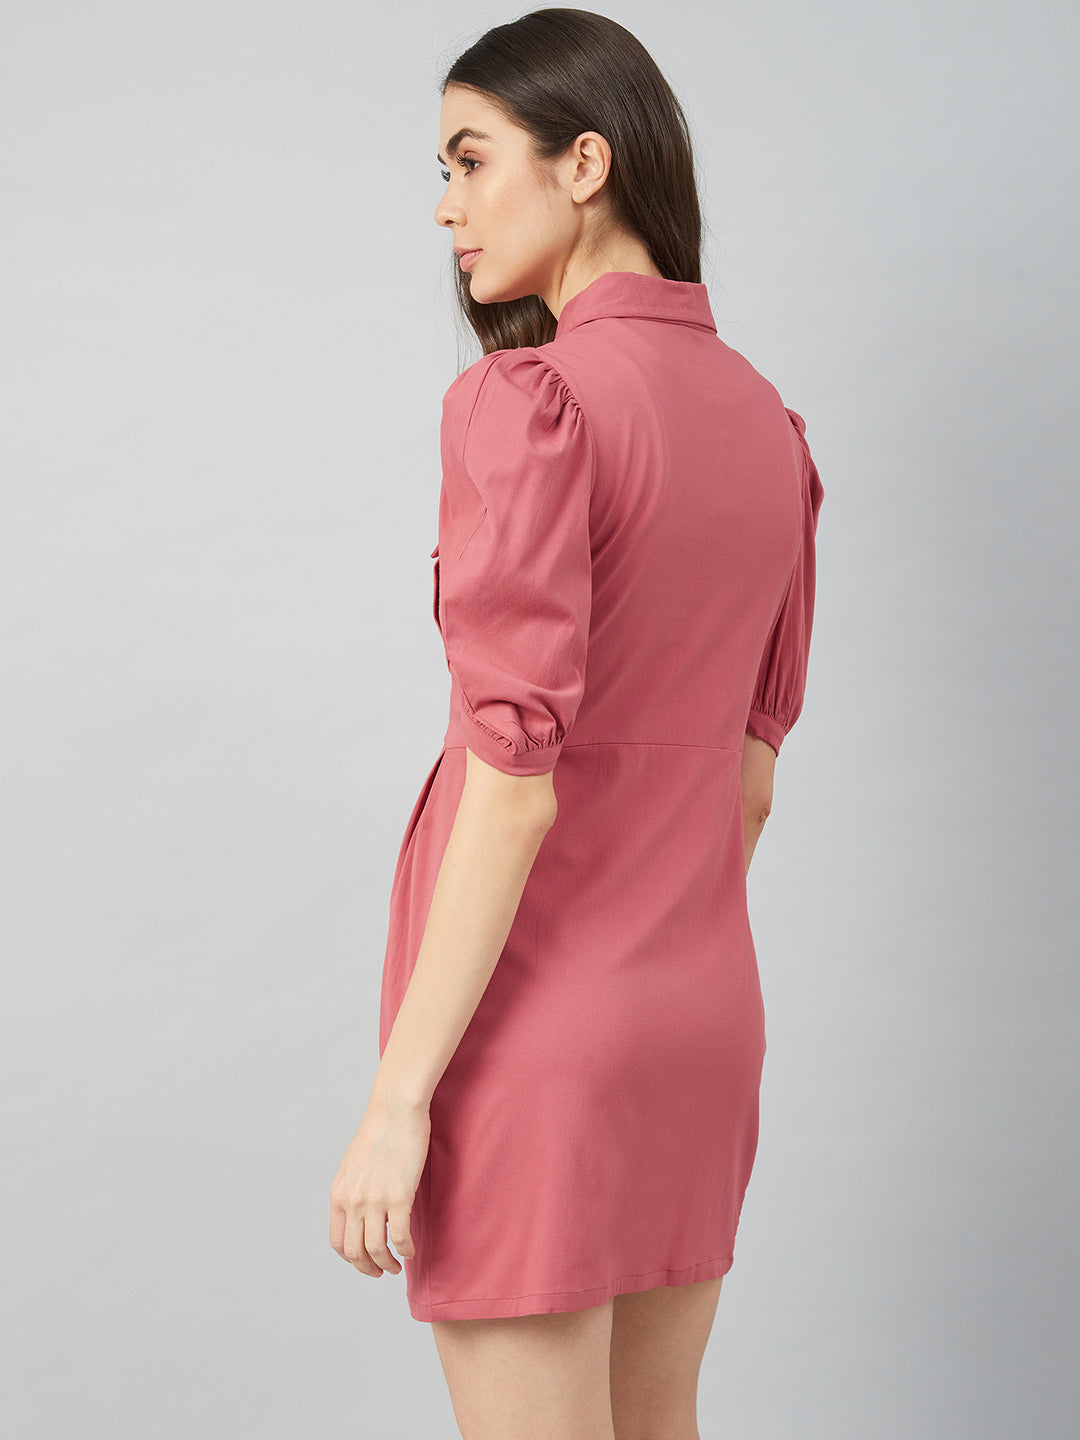 Athena Women Pink Solid Puff Sleeves Shirt Dress with Pockets Detail - Athena Lifestyle